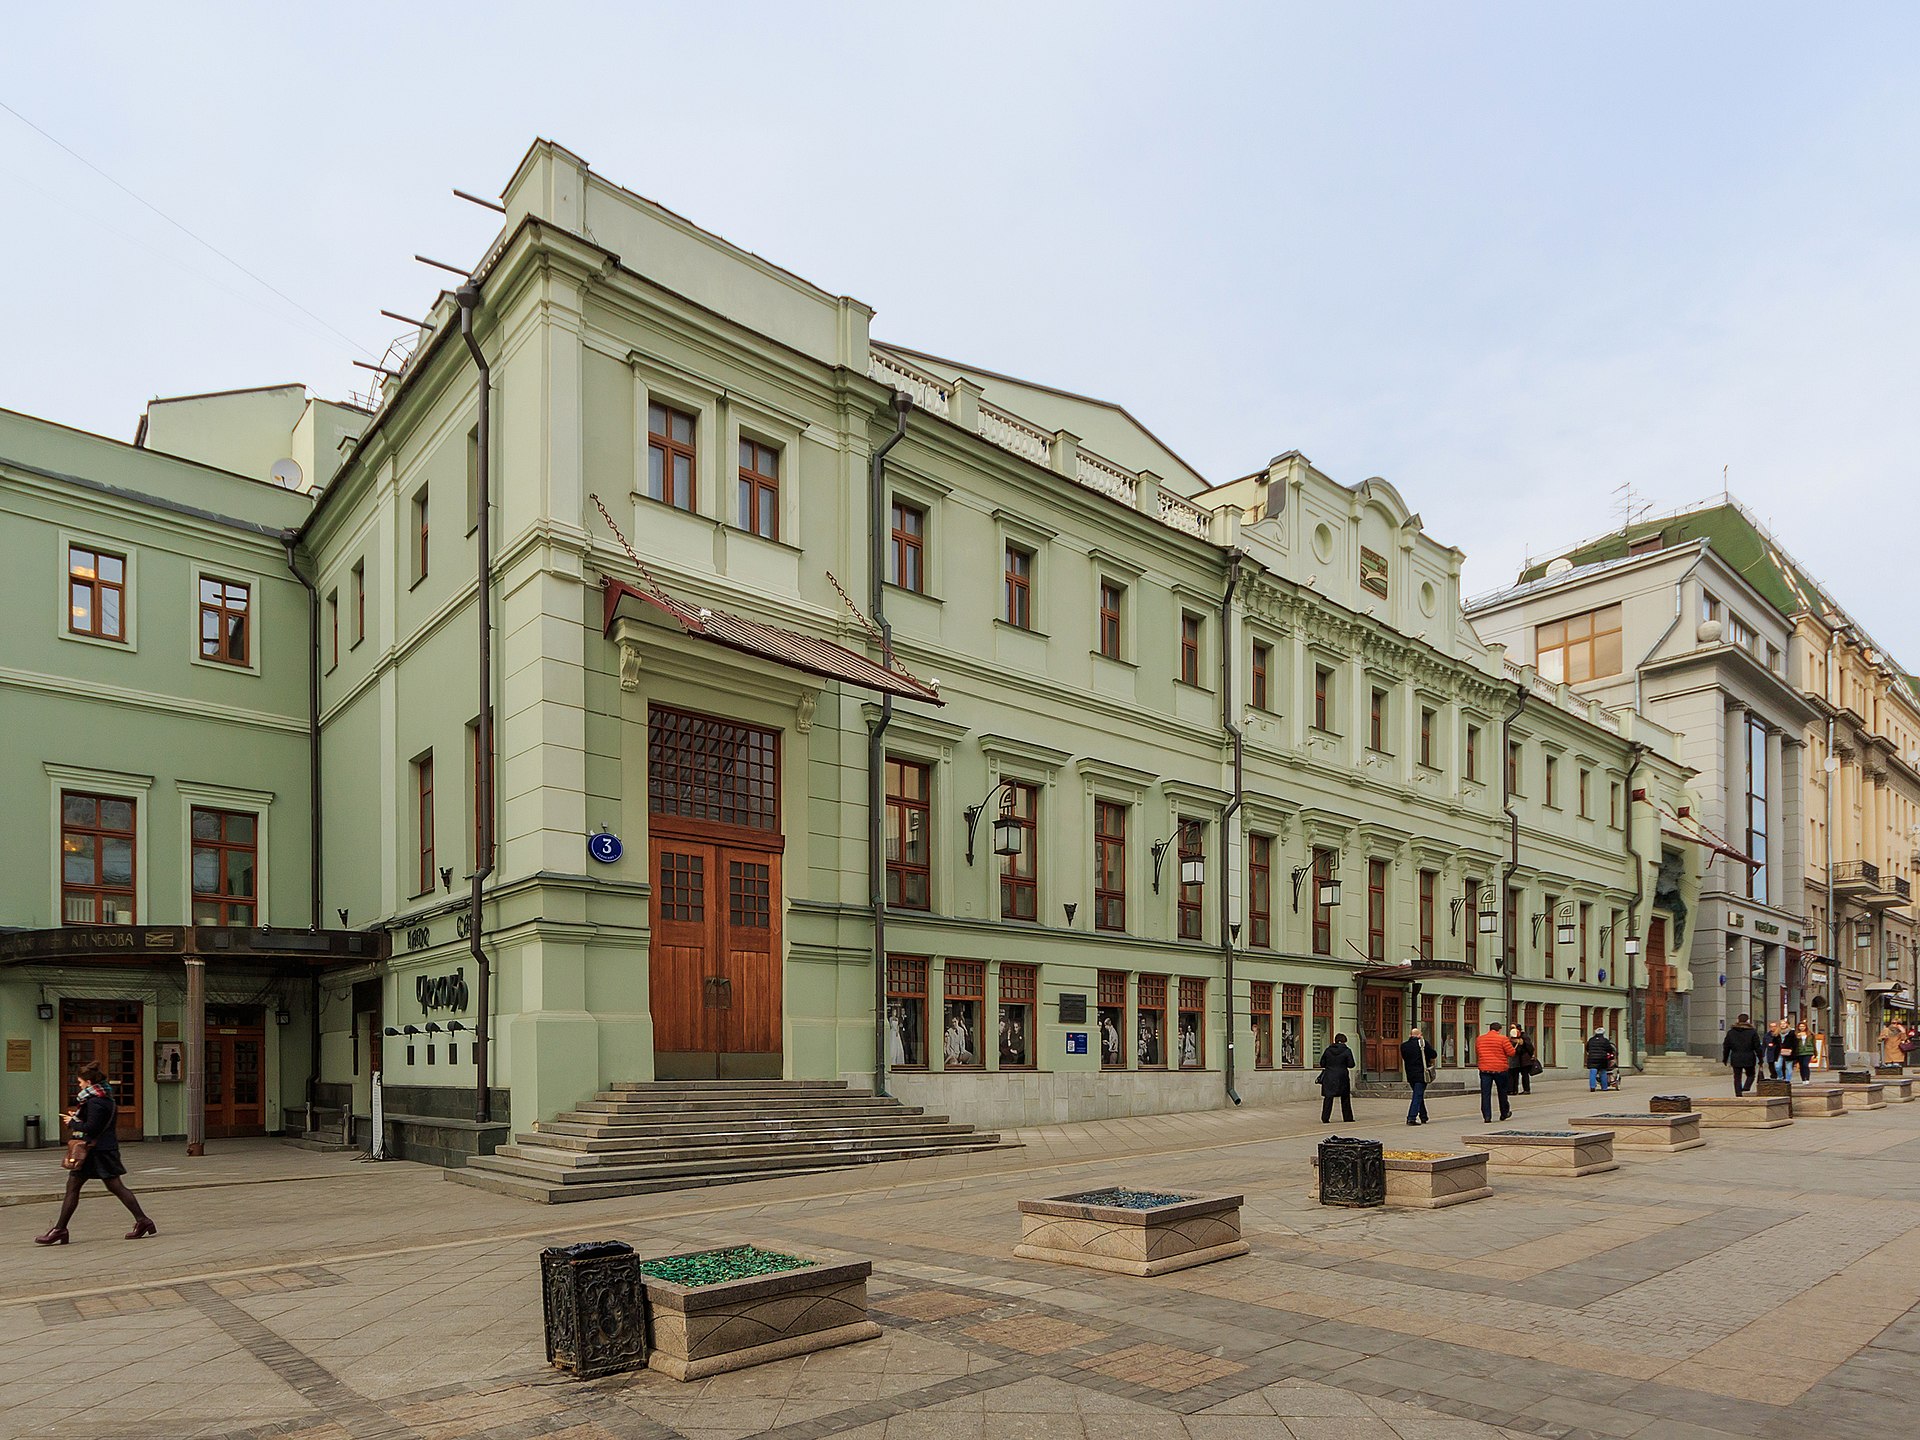 Moscow Art Theatre where UToledo students studied and crewed a production as part of a study abroad experience.